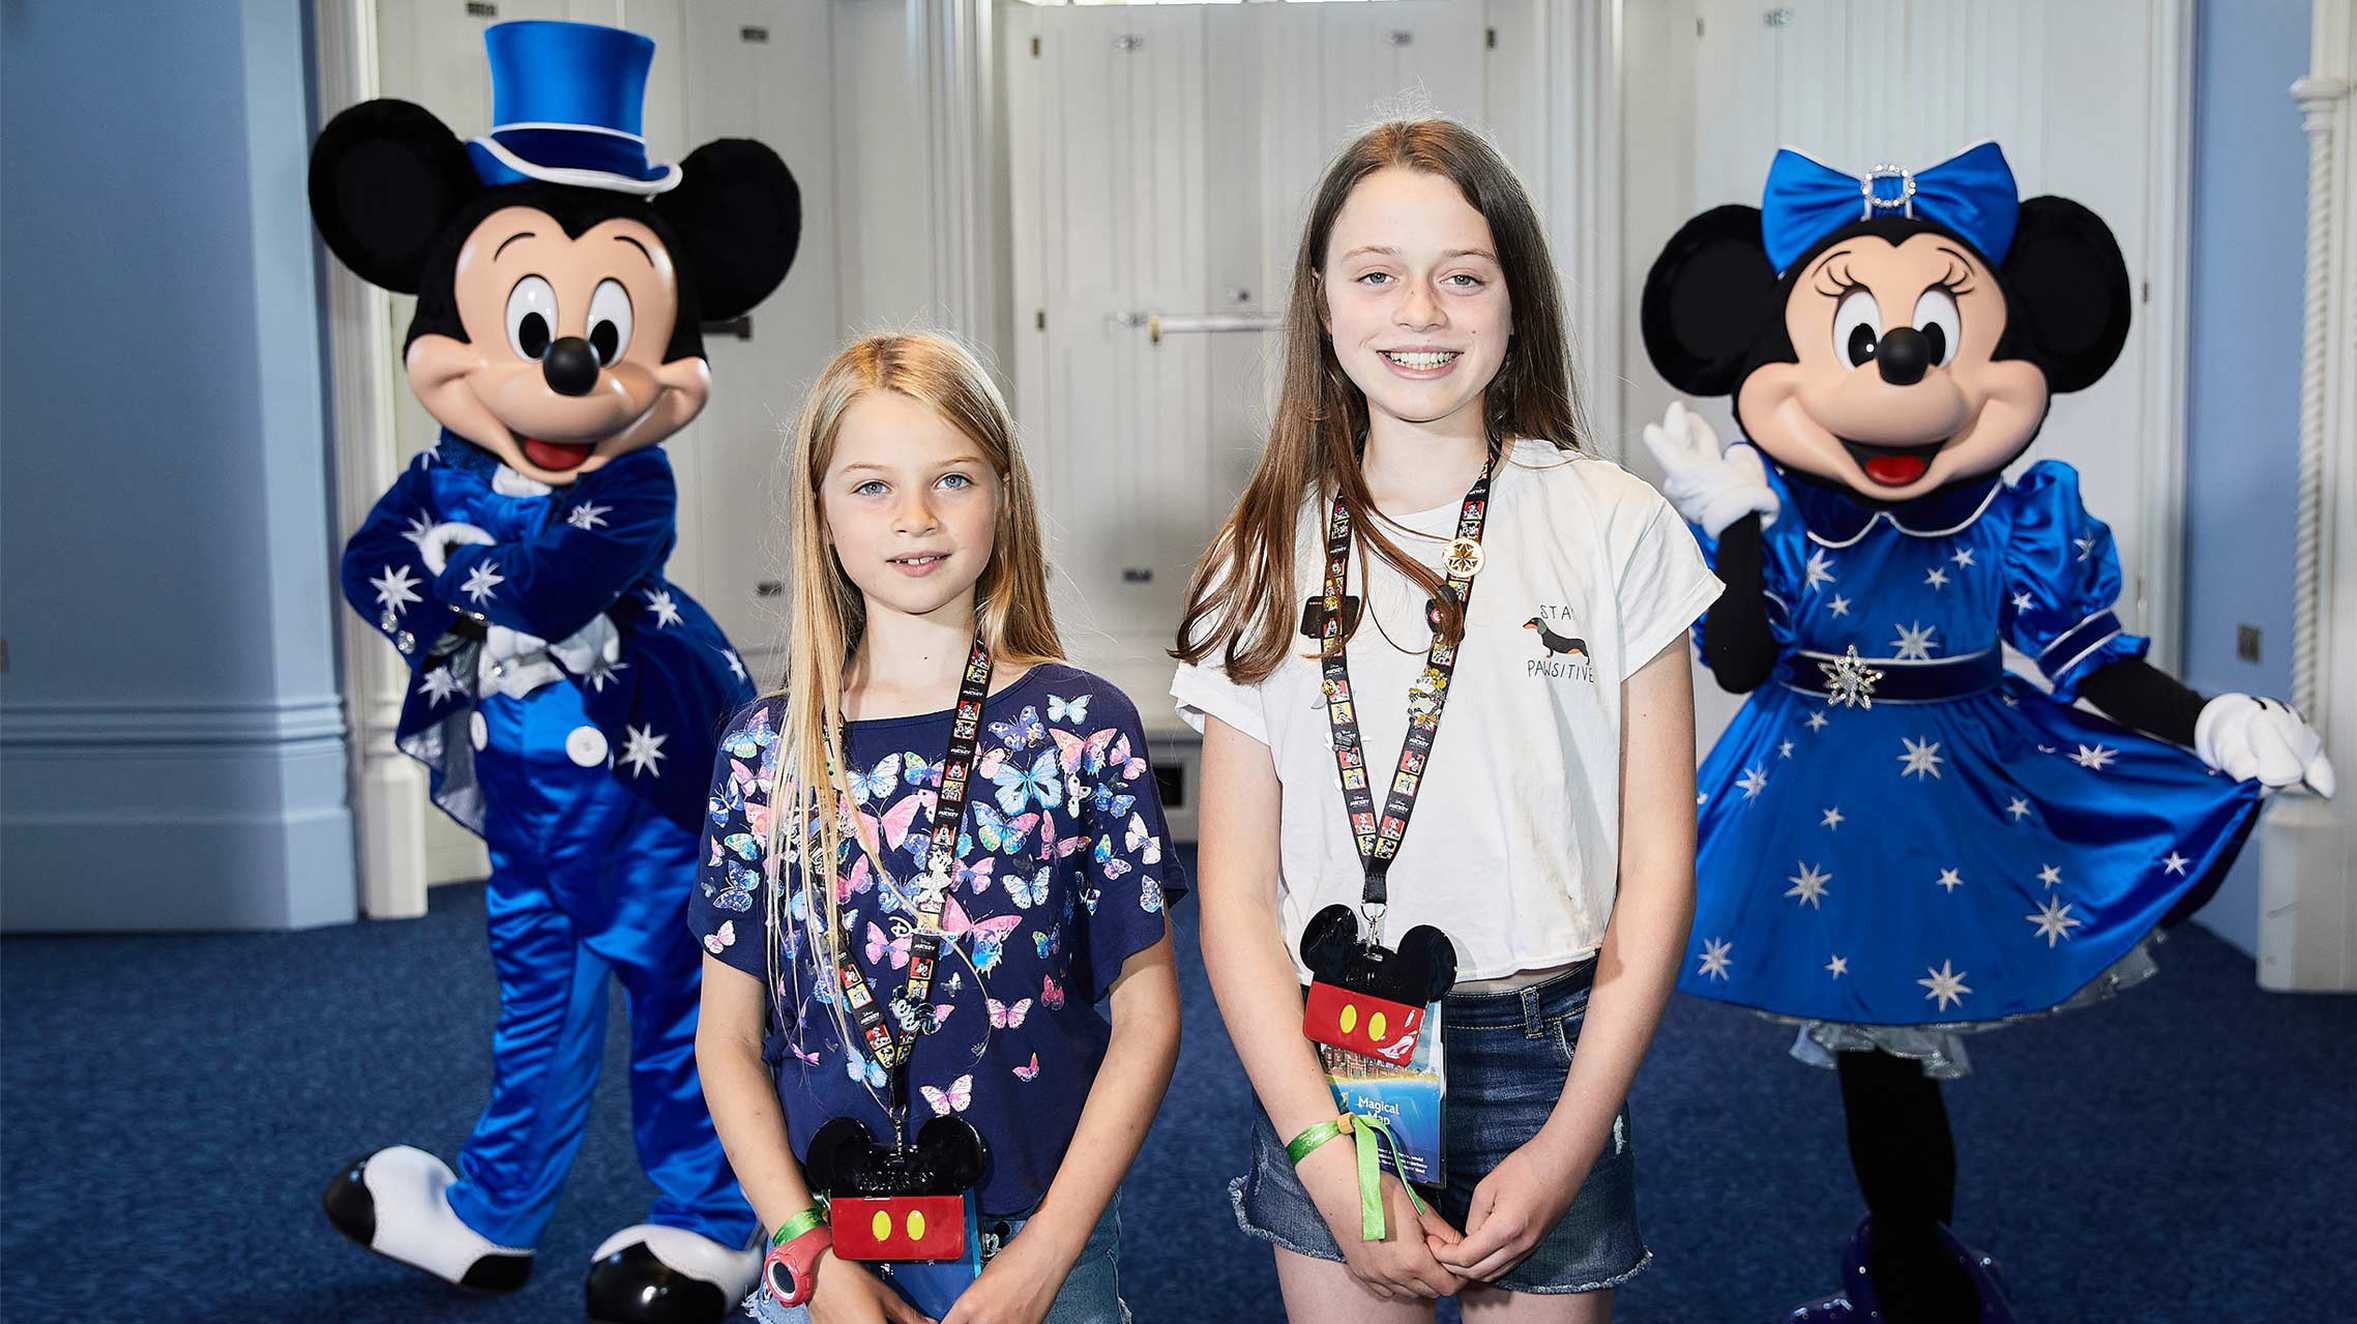 Chloe and her sister Tabatha with Mickey and Minnie